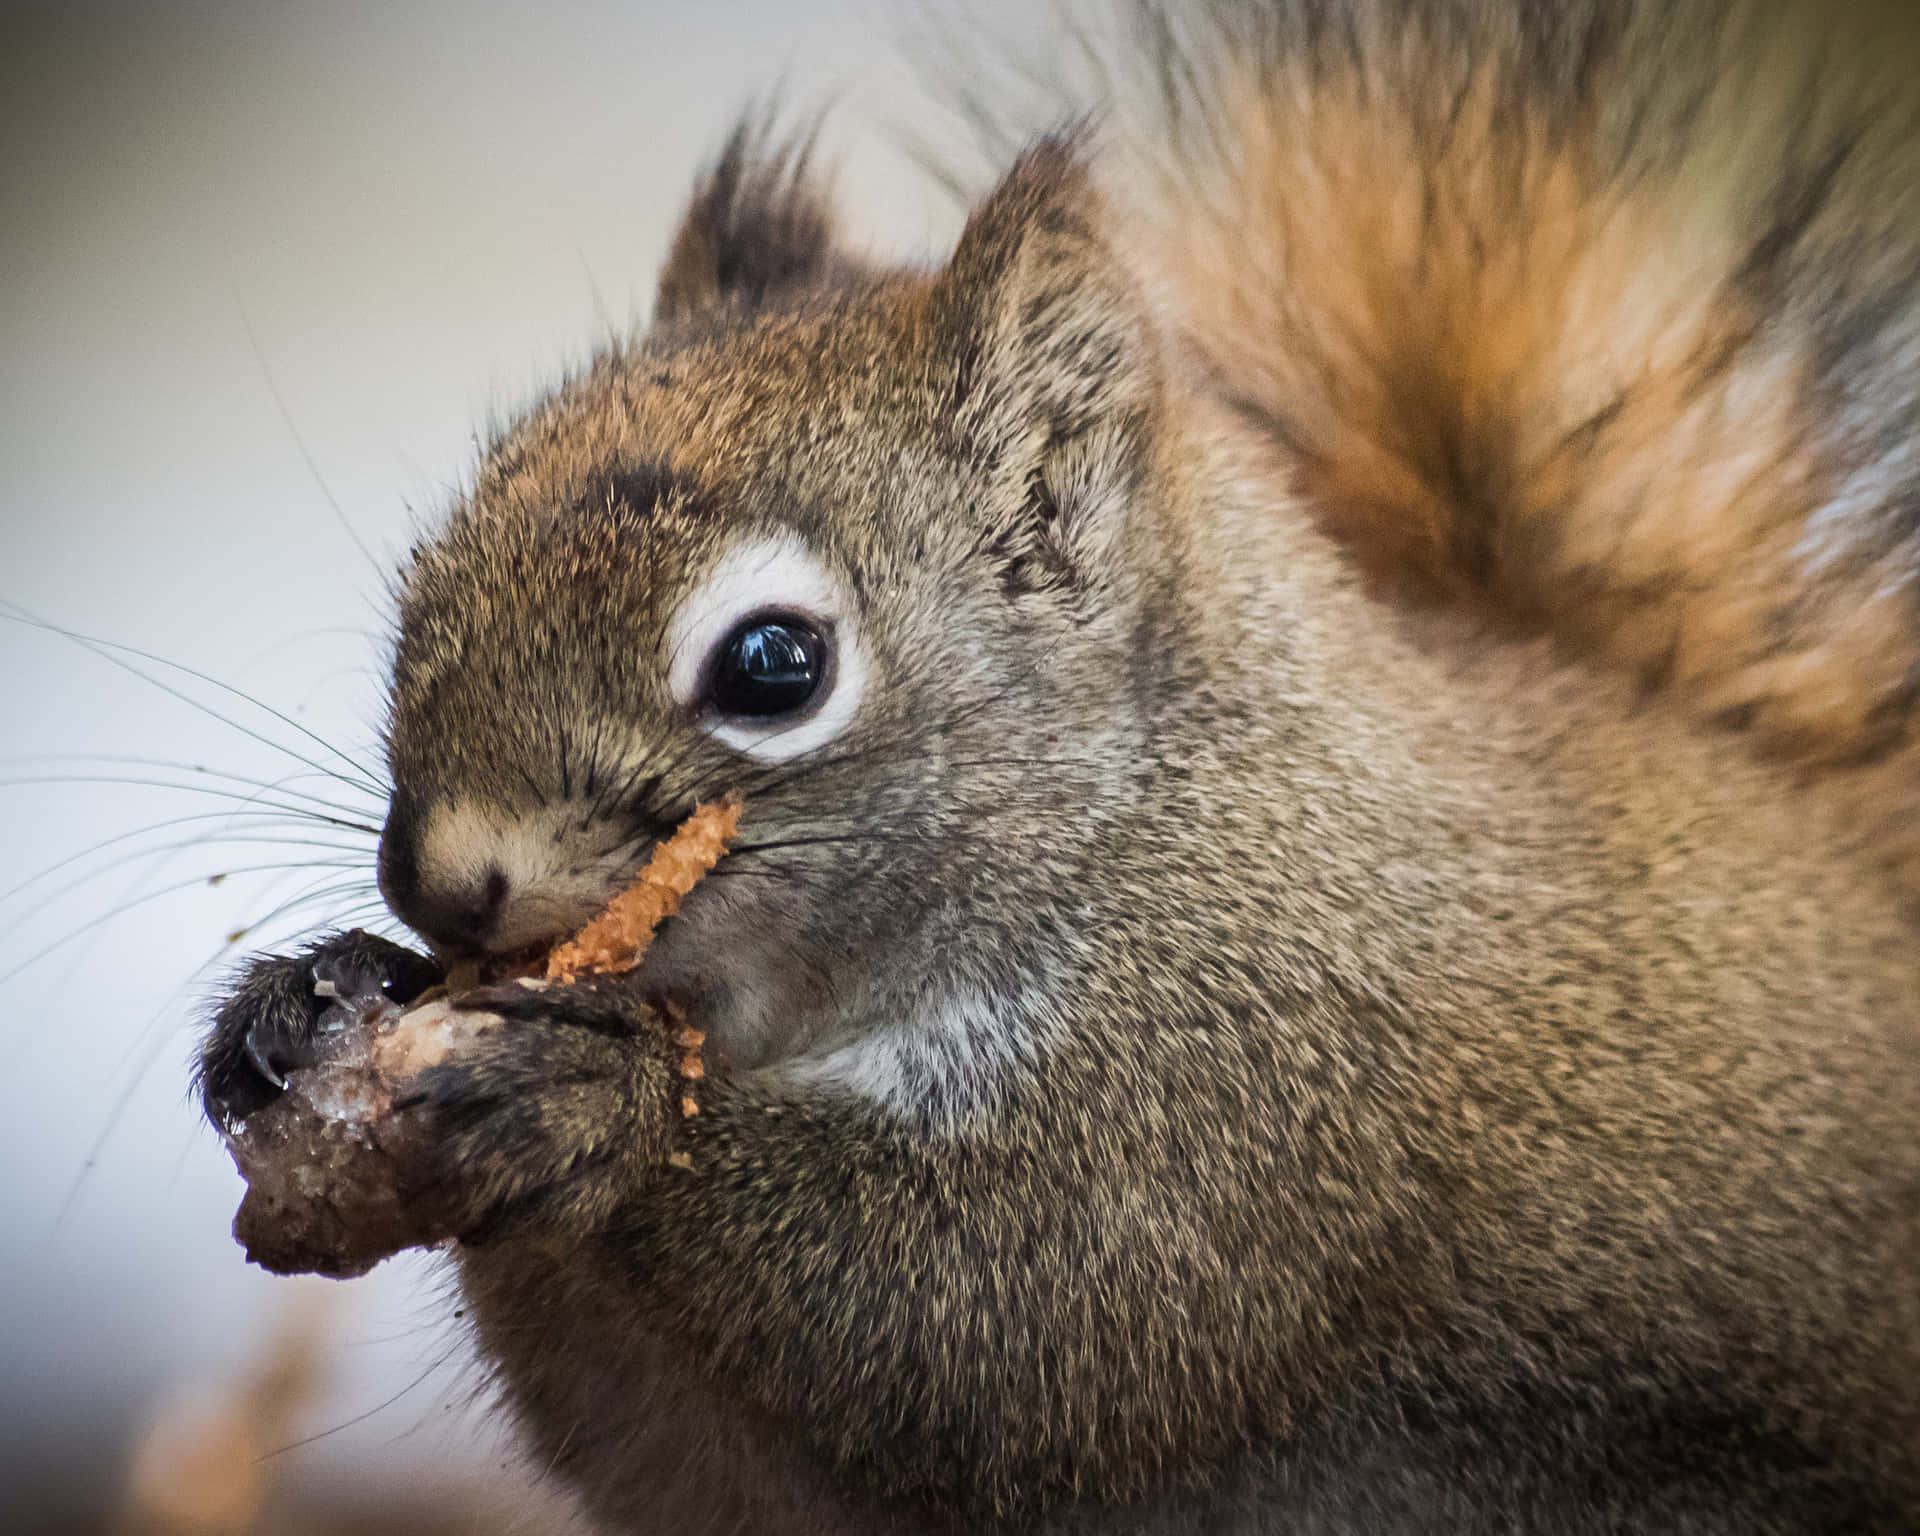 An Adorable Squirrel Taking a Snack Break